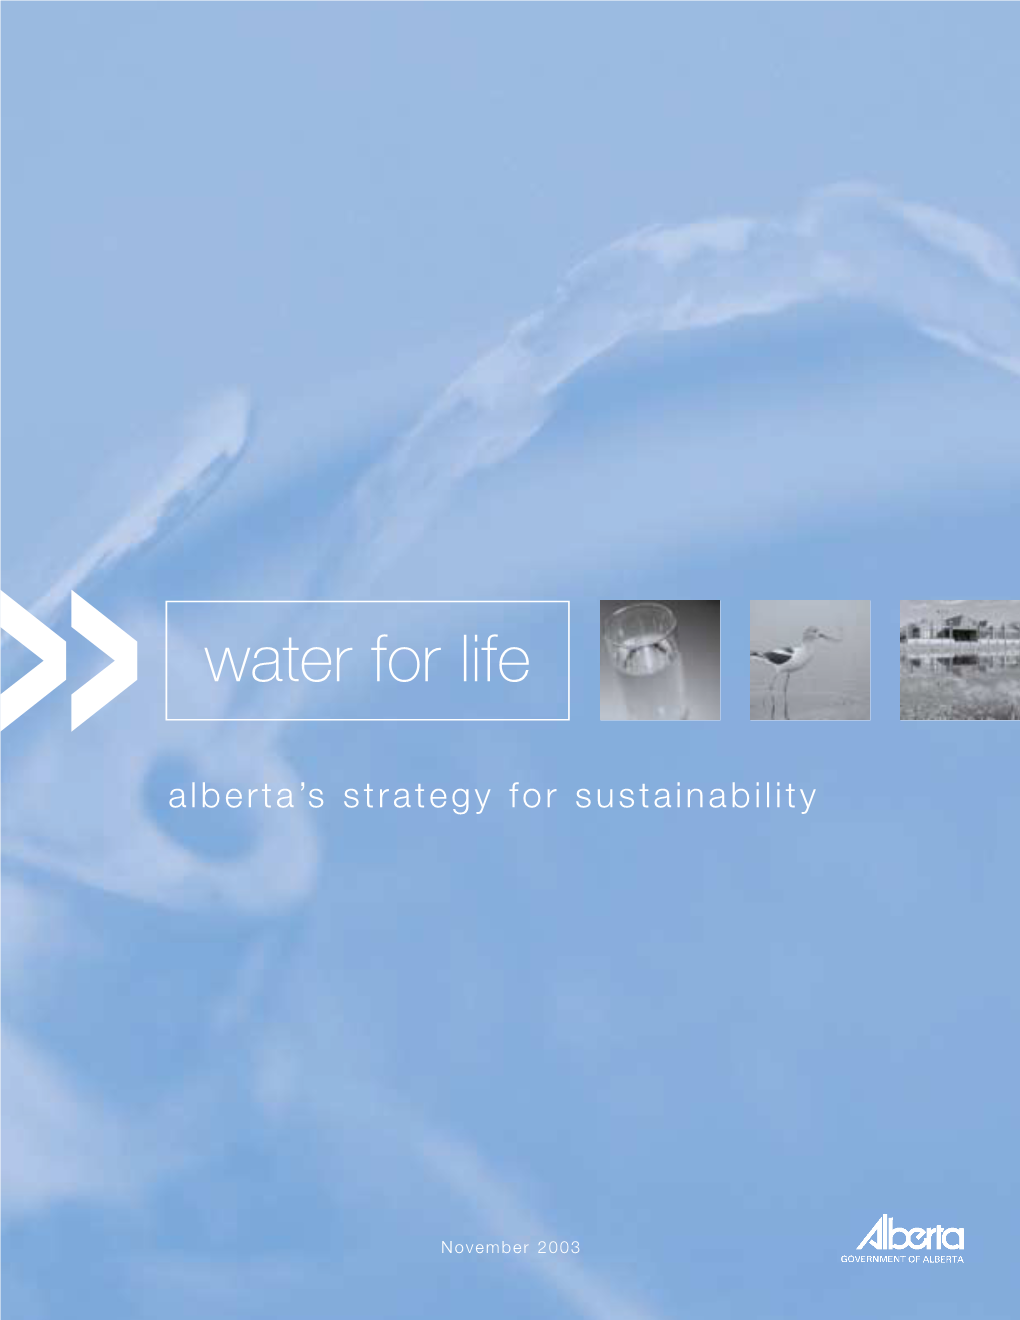 Water for Life: Alberta's Strategy for Sustainability